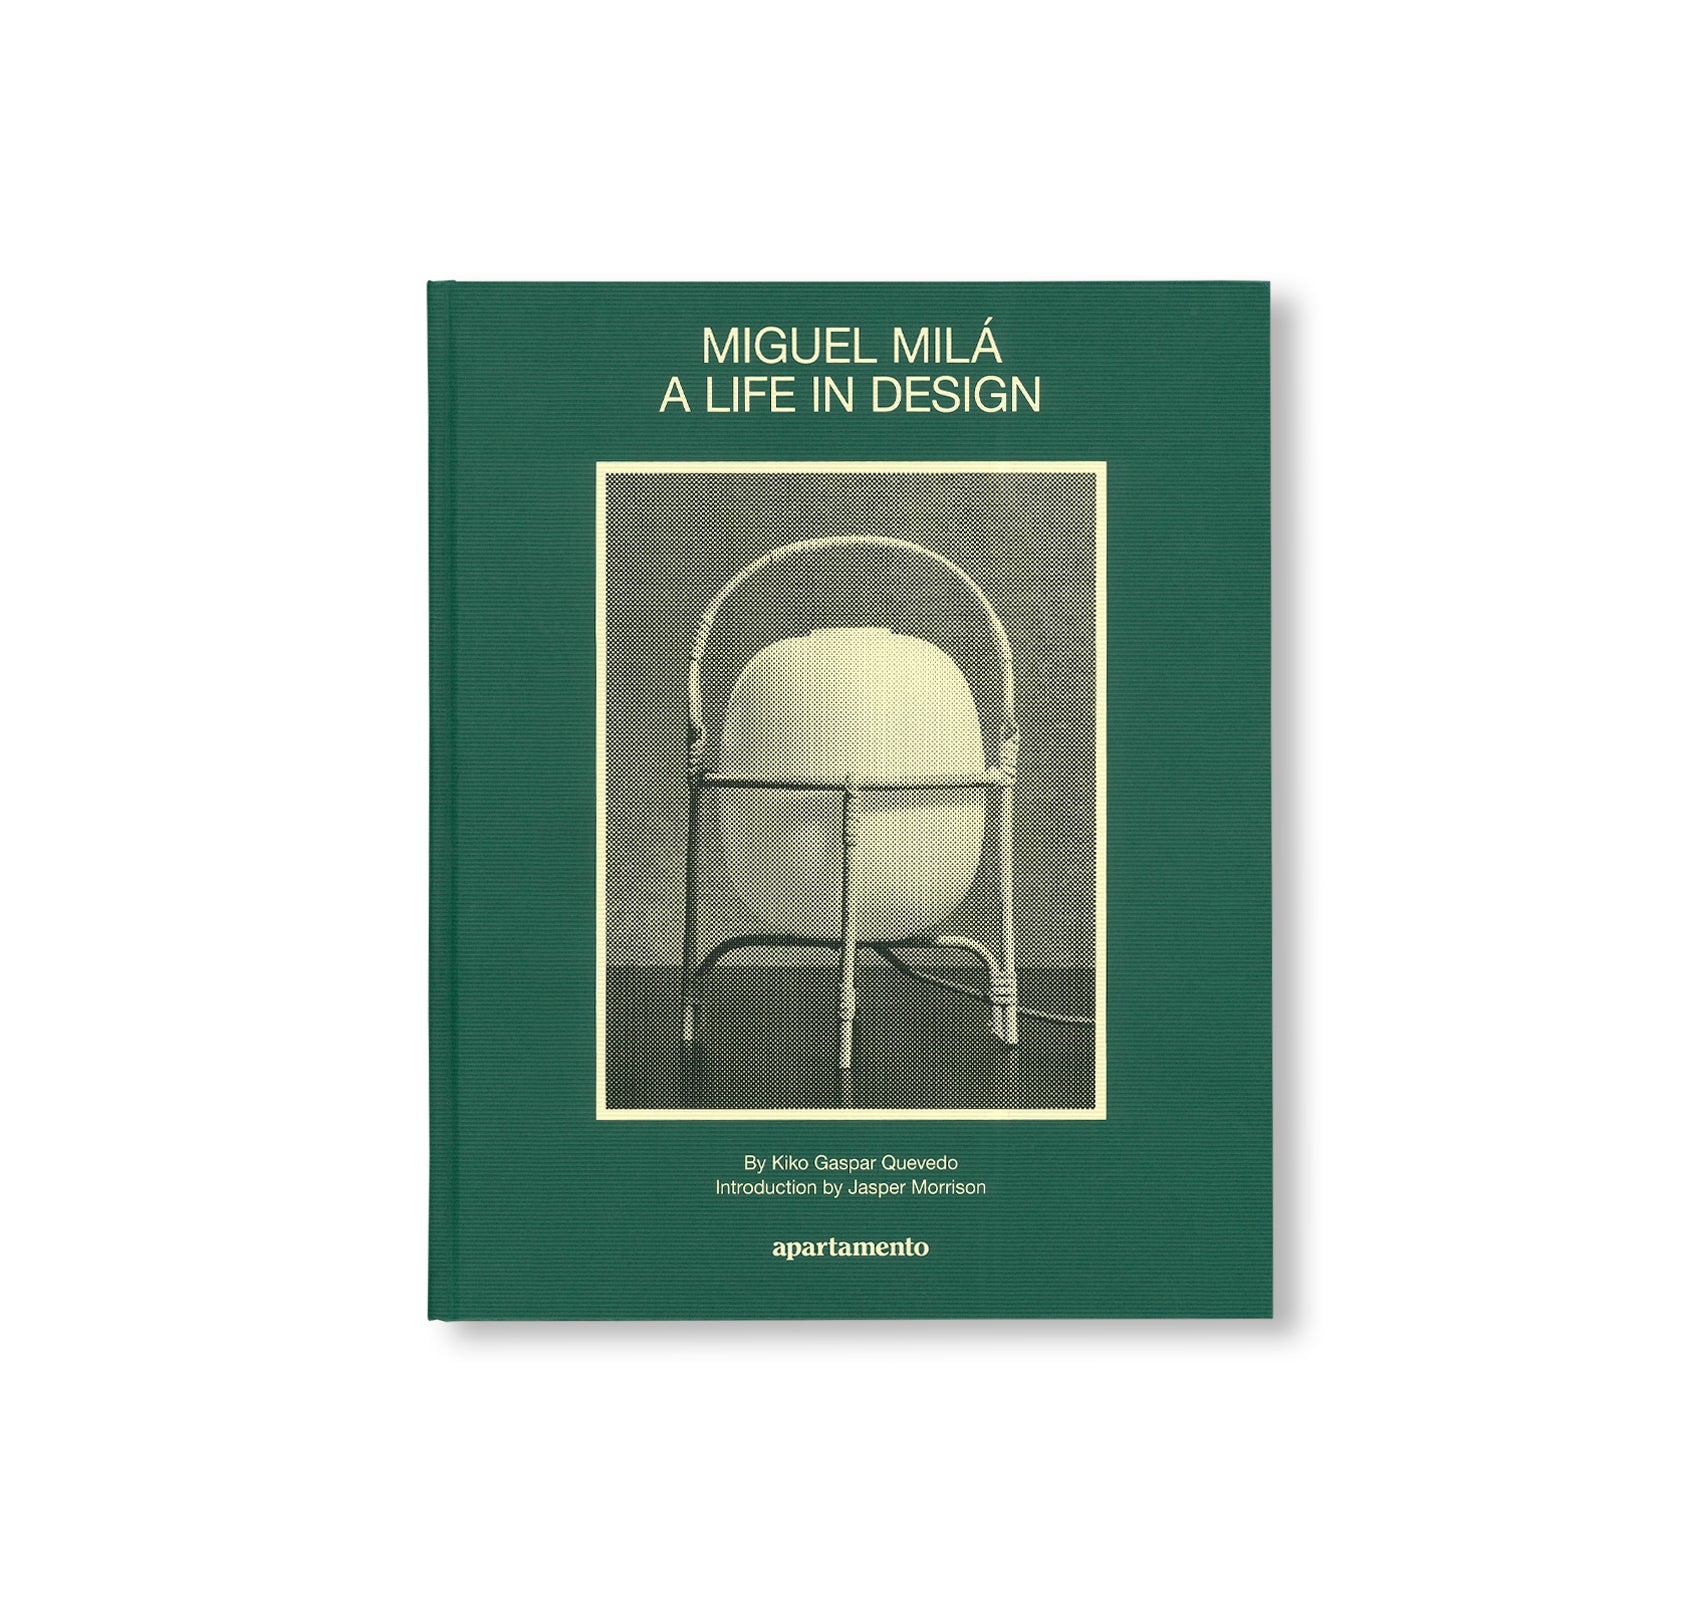 A LIFE IN DESIGN by Miguel Milá [HARDCOVER]